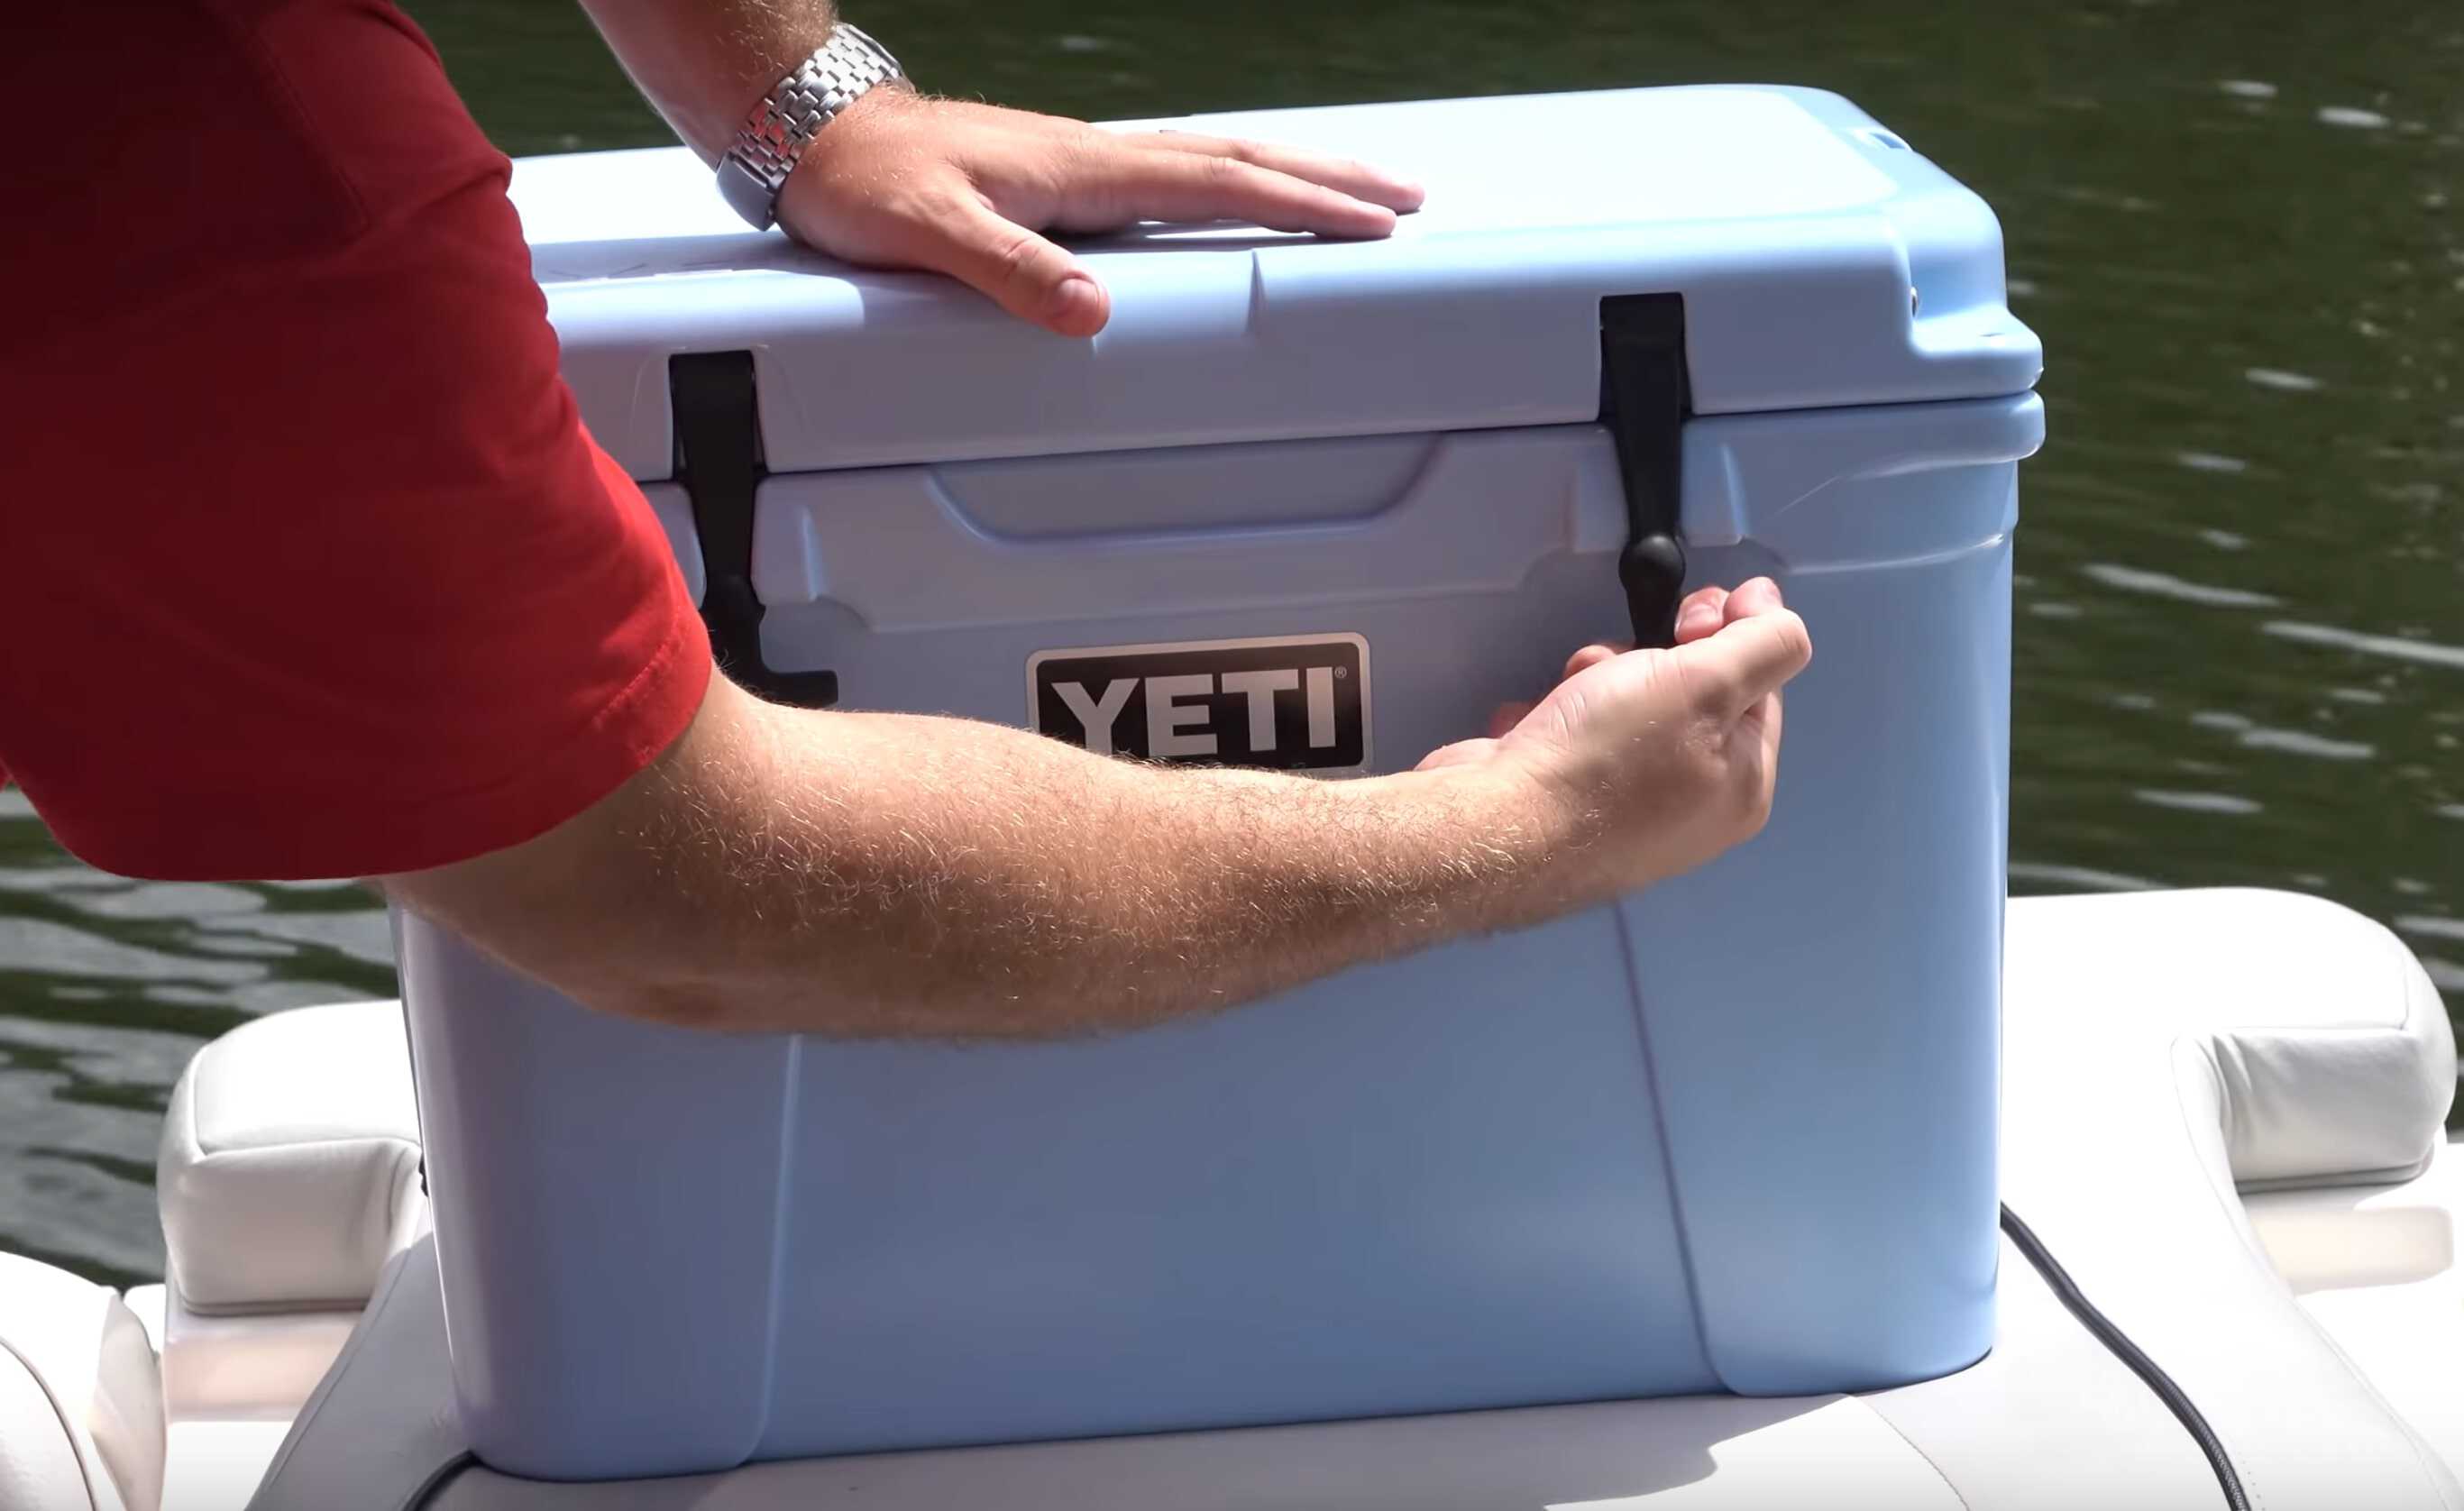 Yeti Tundra 35: My favorite cooler of all time!